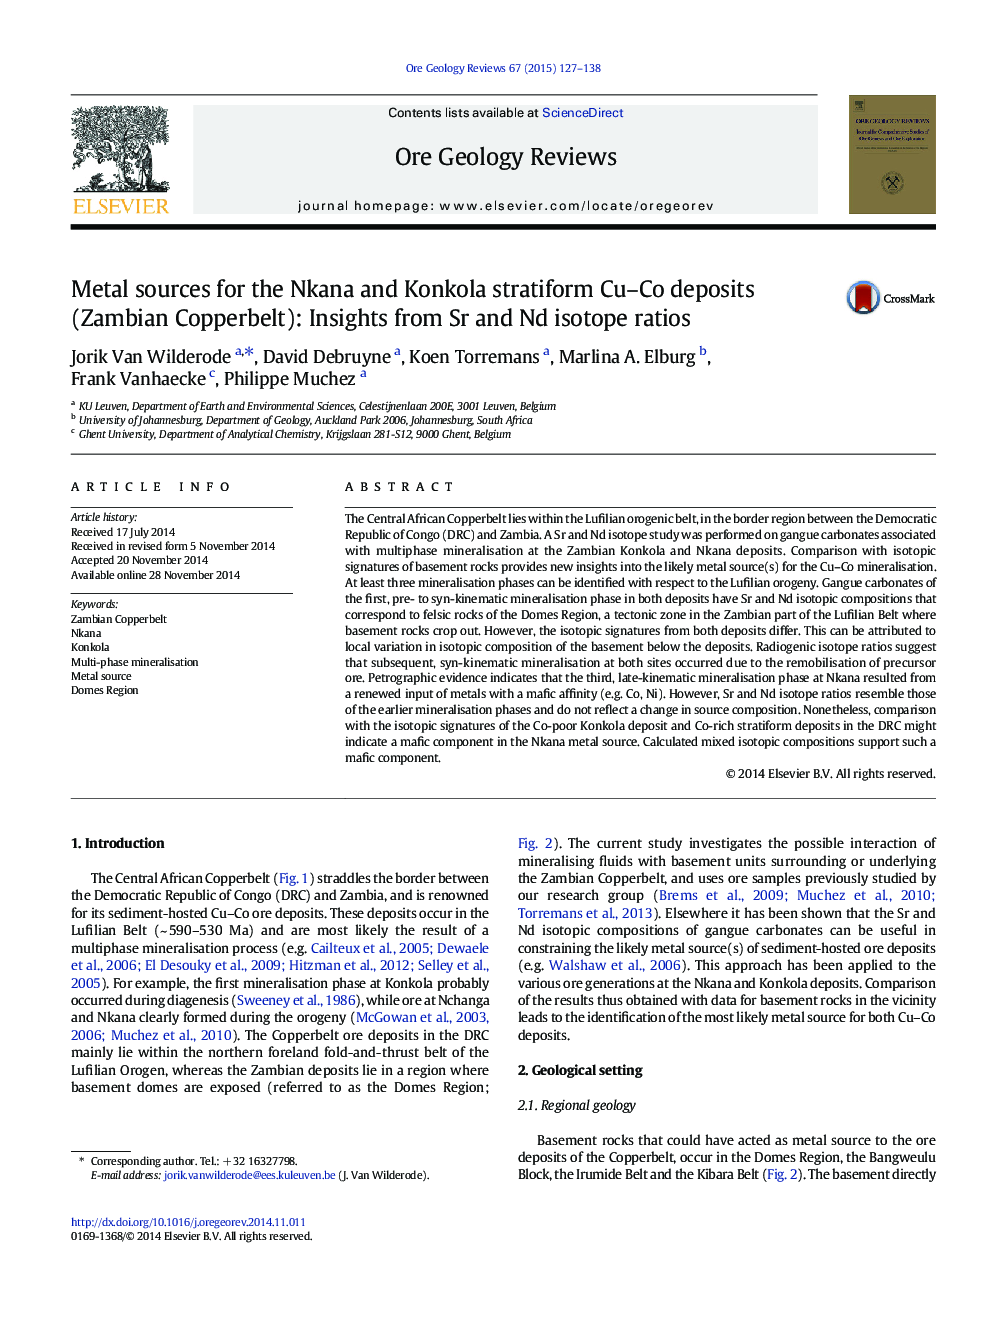 Metal sources for the Nkana and Konkola stratiform Cu-Co deposits (Zambian Copperbelt): Insights from Sr and Nd isotope ratios